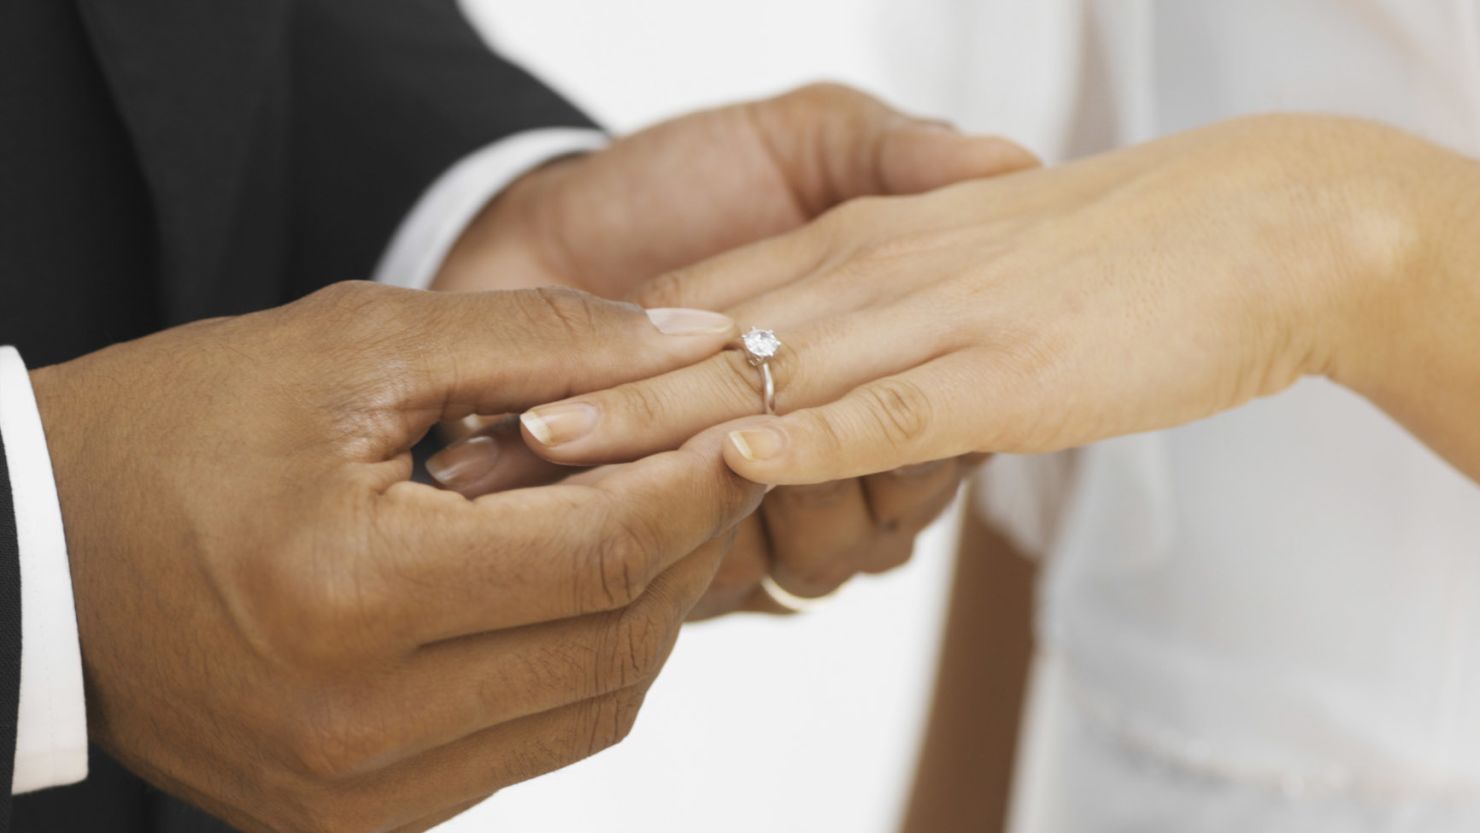 About 15% of new marriages in the United States in 2010 were between spouses of different races or ethnicities.